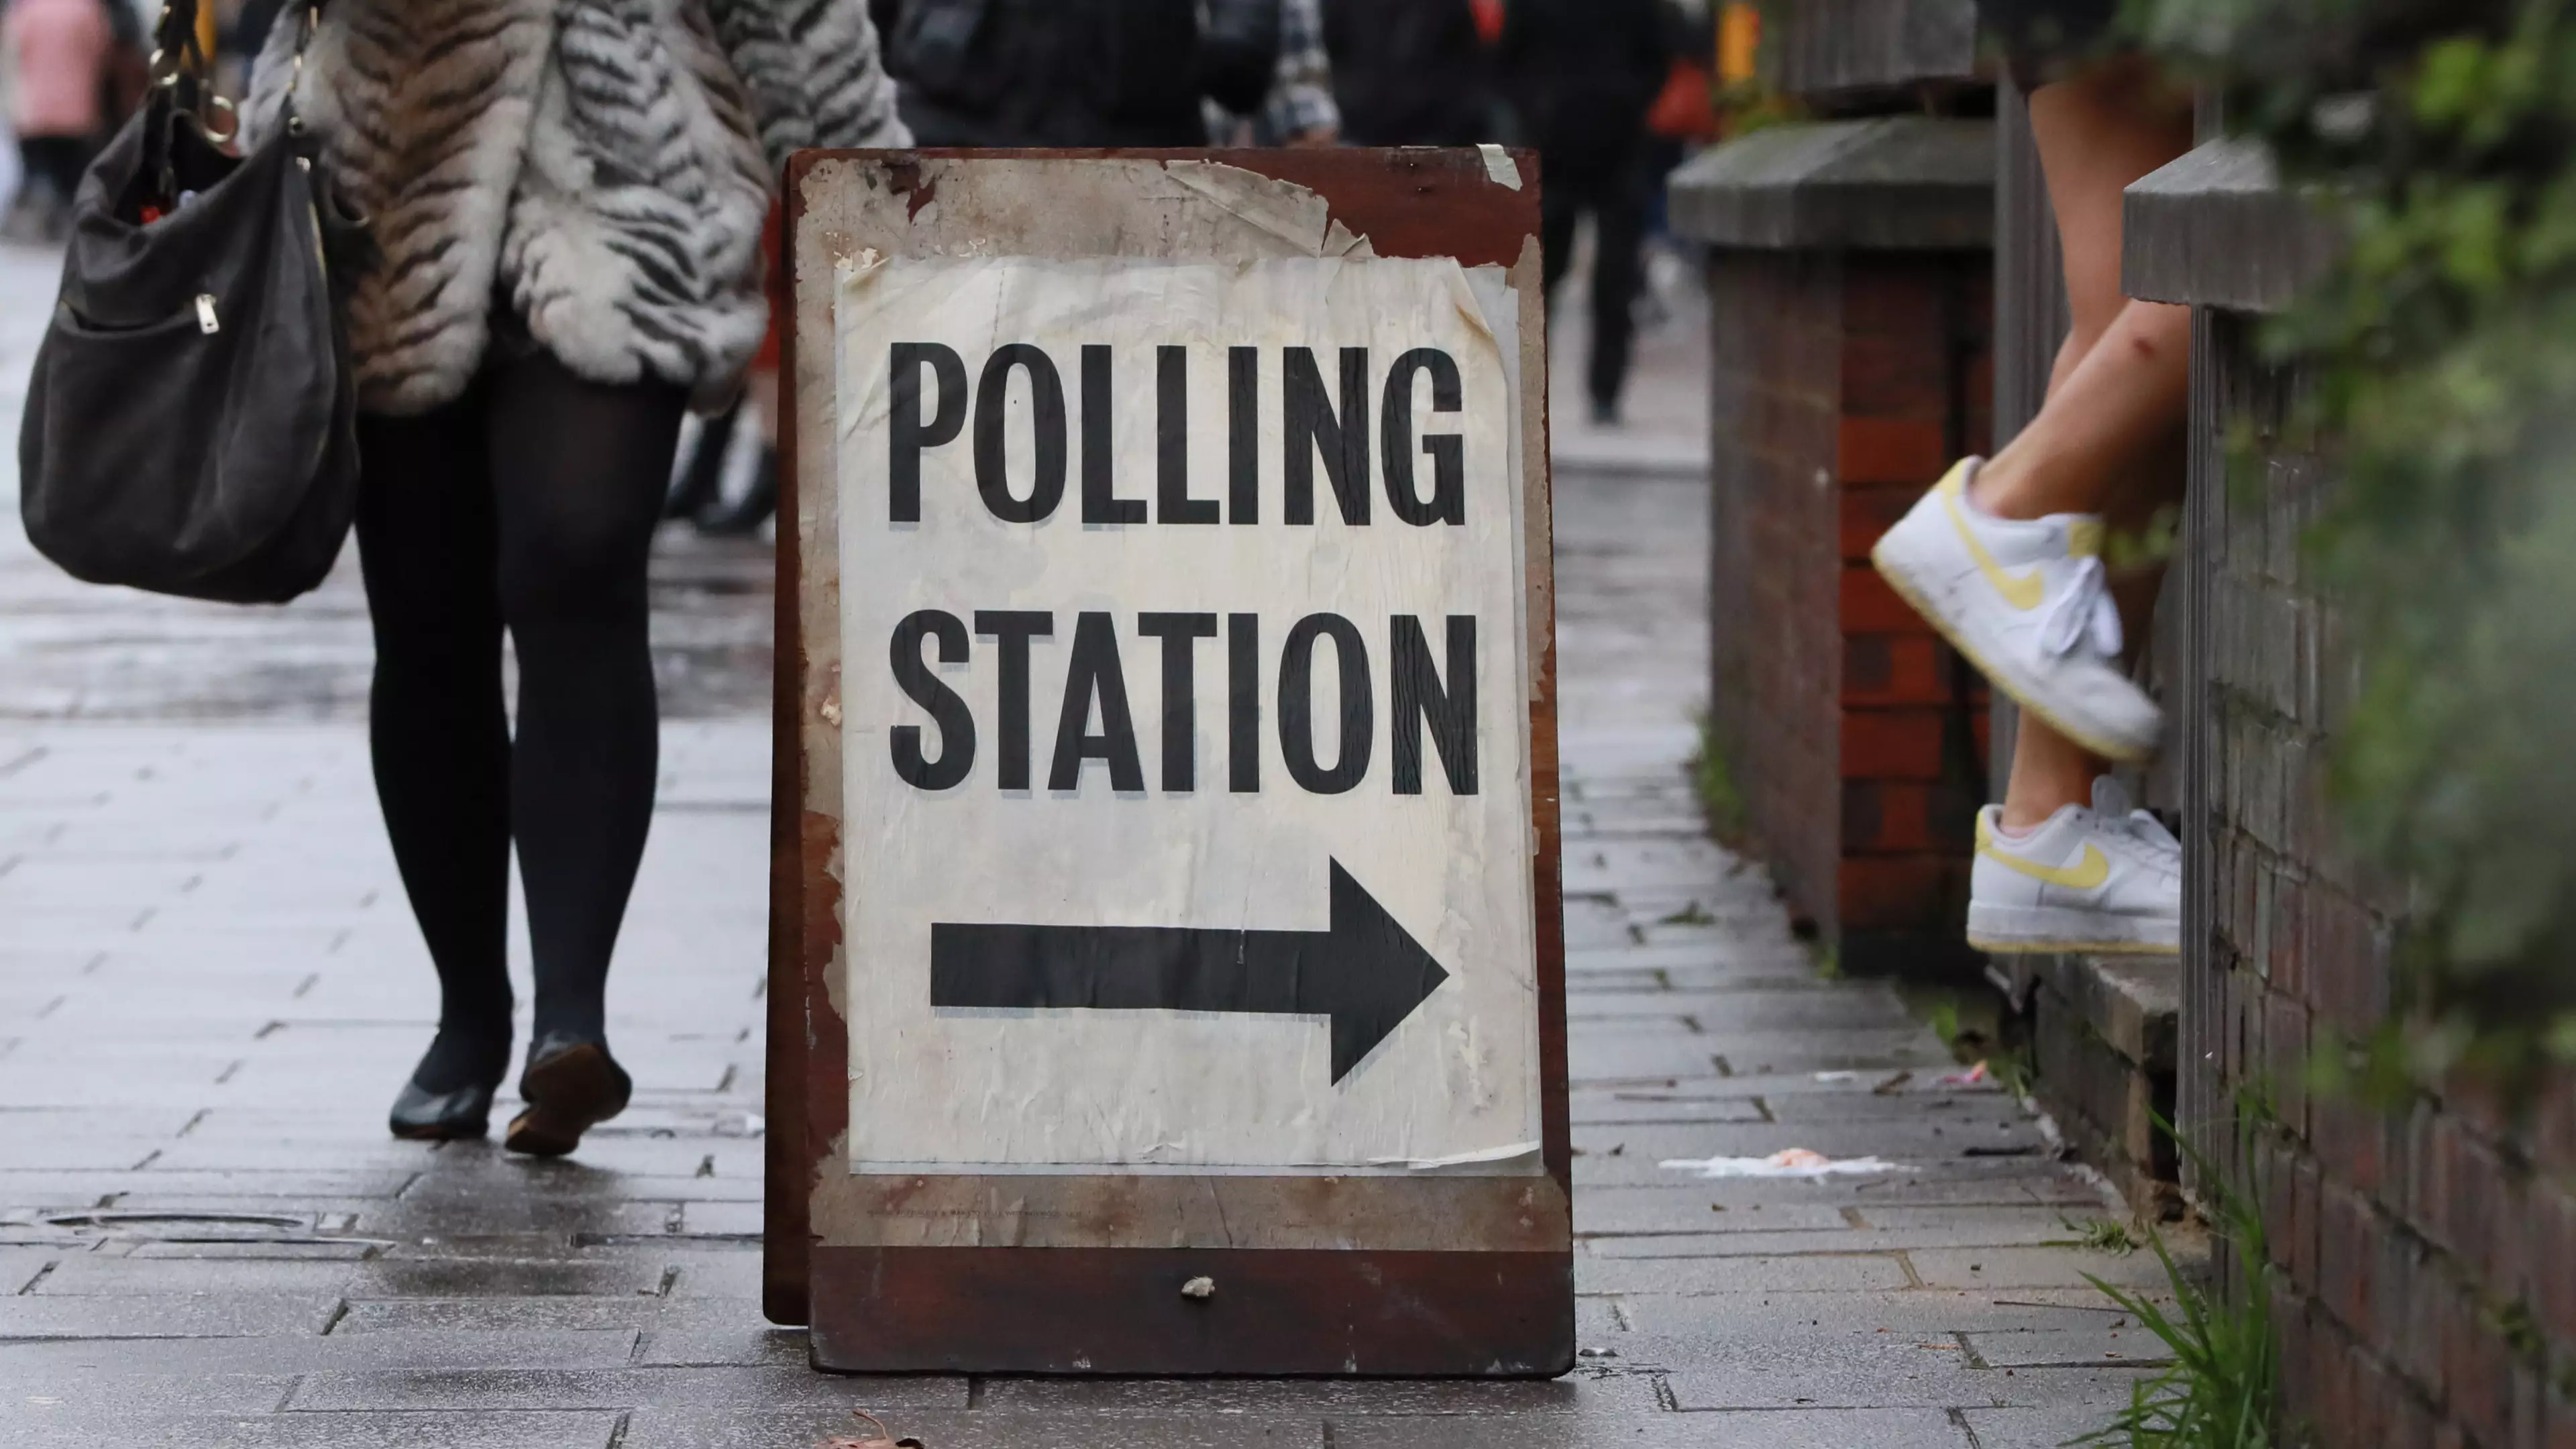 Exit Poll Predicts Conservative Majority In 2019 UK General Election